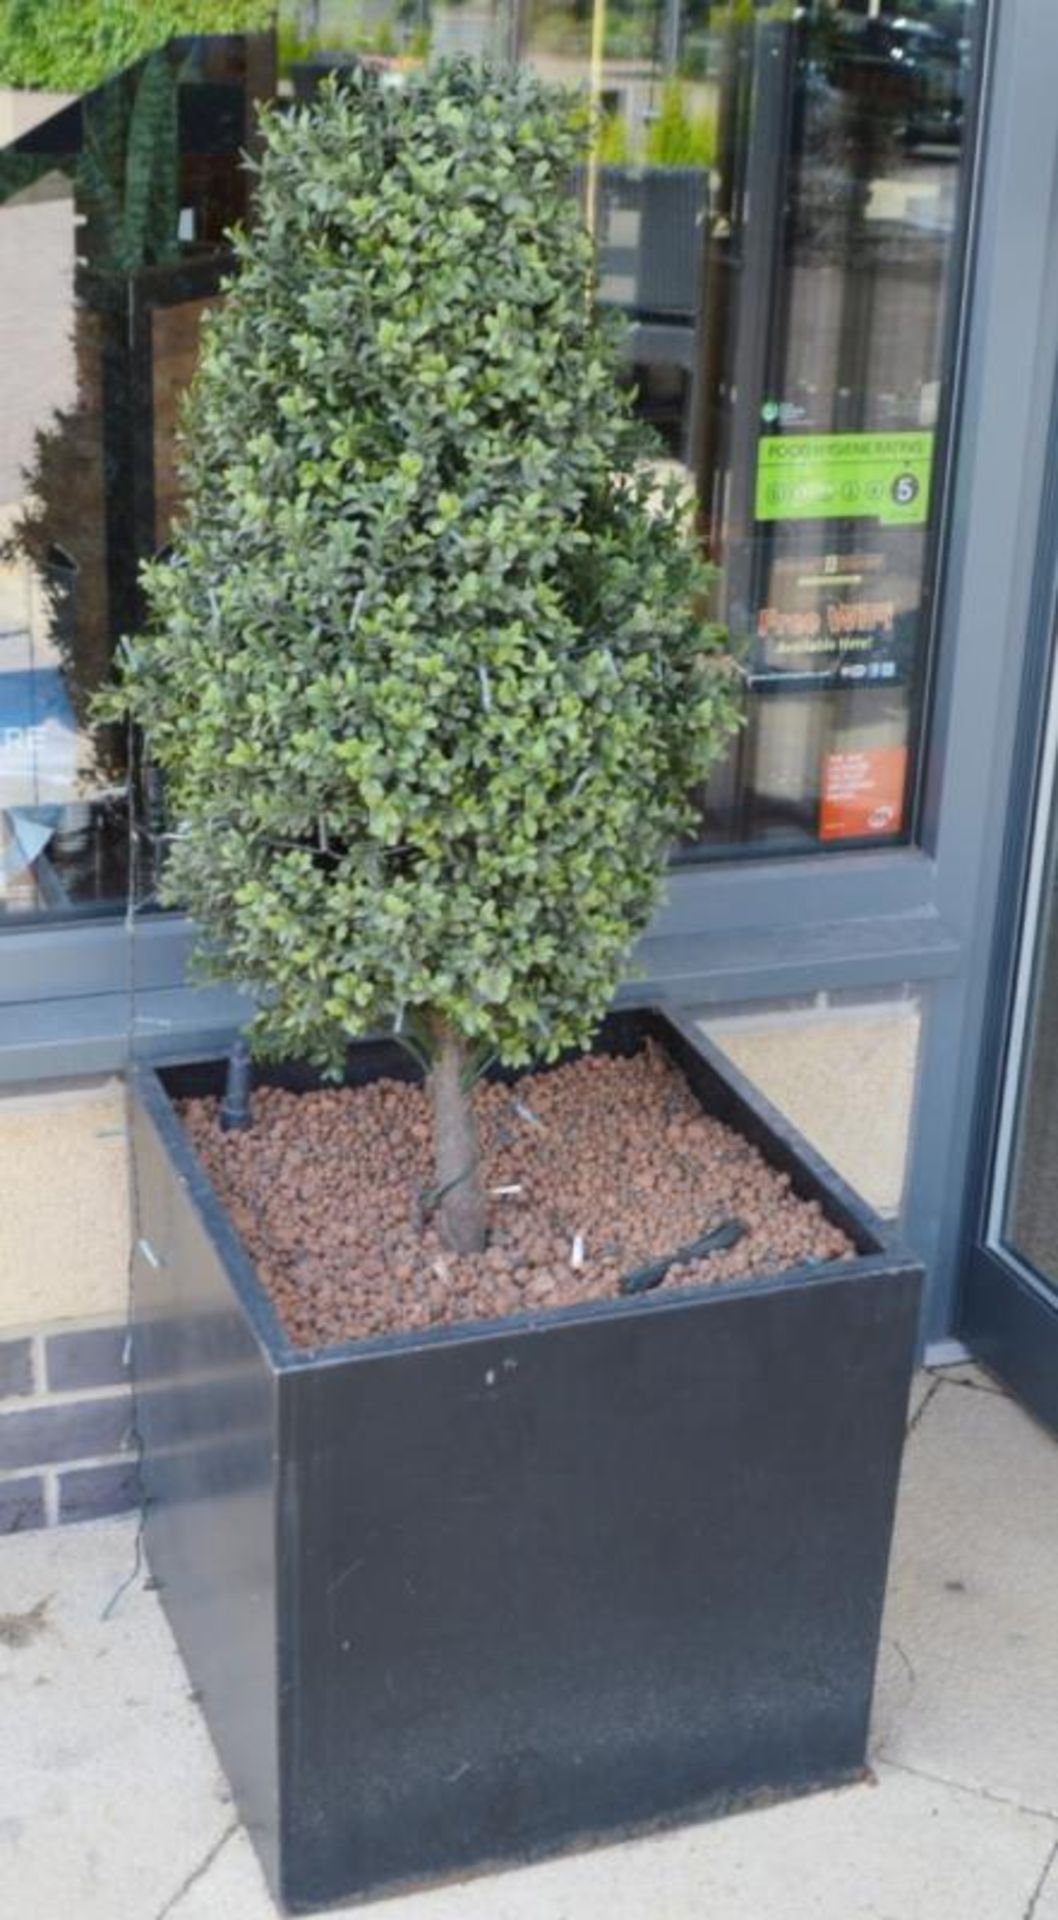 2 x Outdoor Live Plants in Black Planters - H50/120 x W50 x D50 cms - CL390 - Location: Sheffield